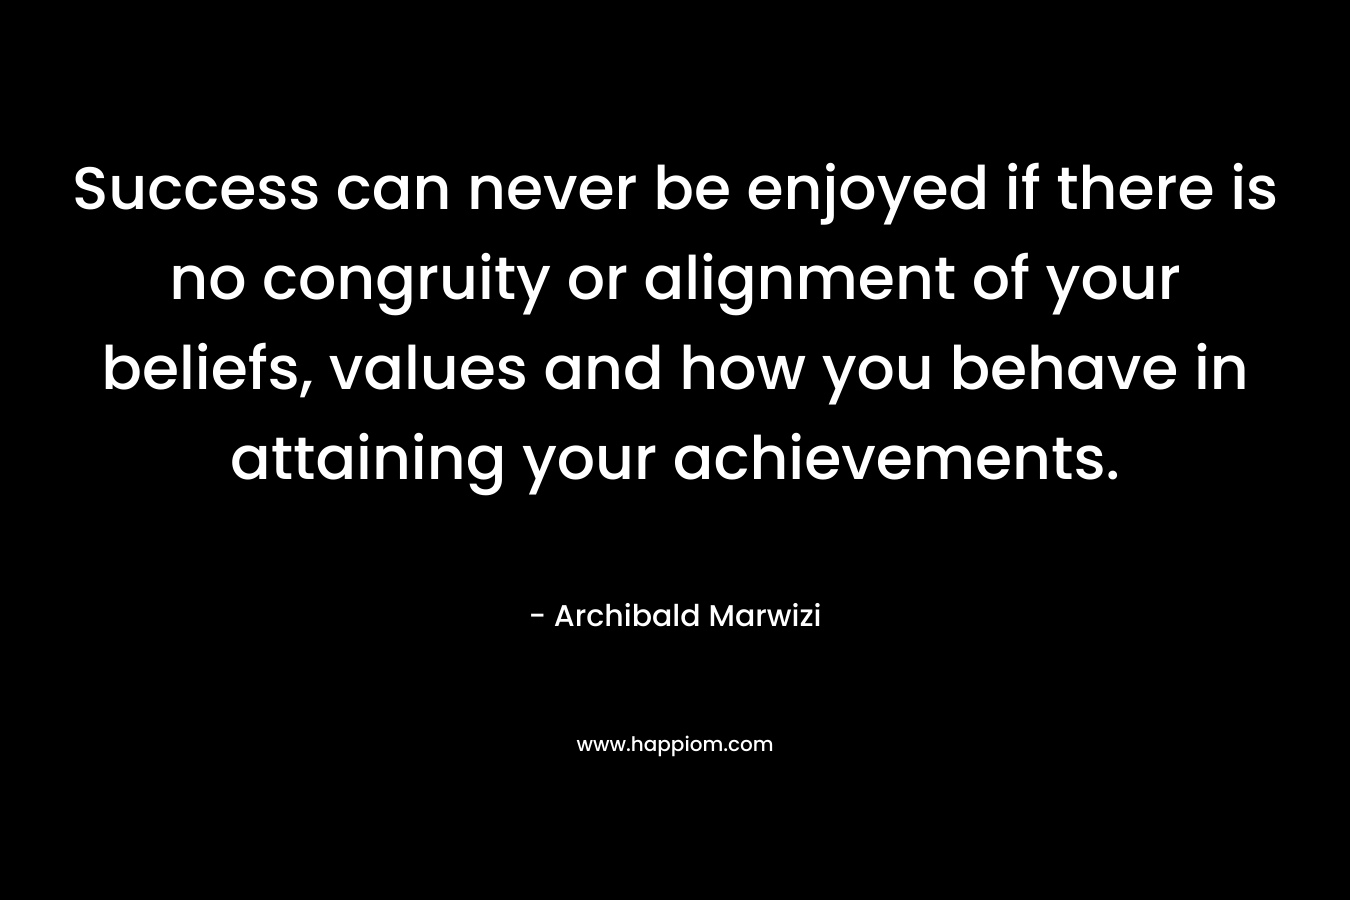 Success can never be enjoyed if there is no congruity or alignment of your beliefs, values and how you behave in attaining your achievements. – Archibald Marwizi